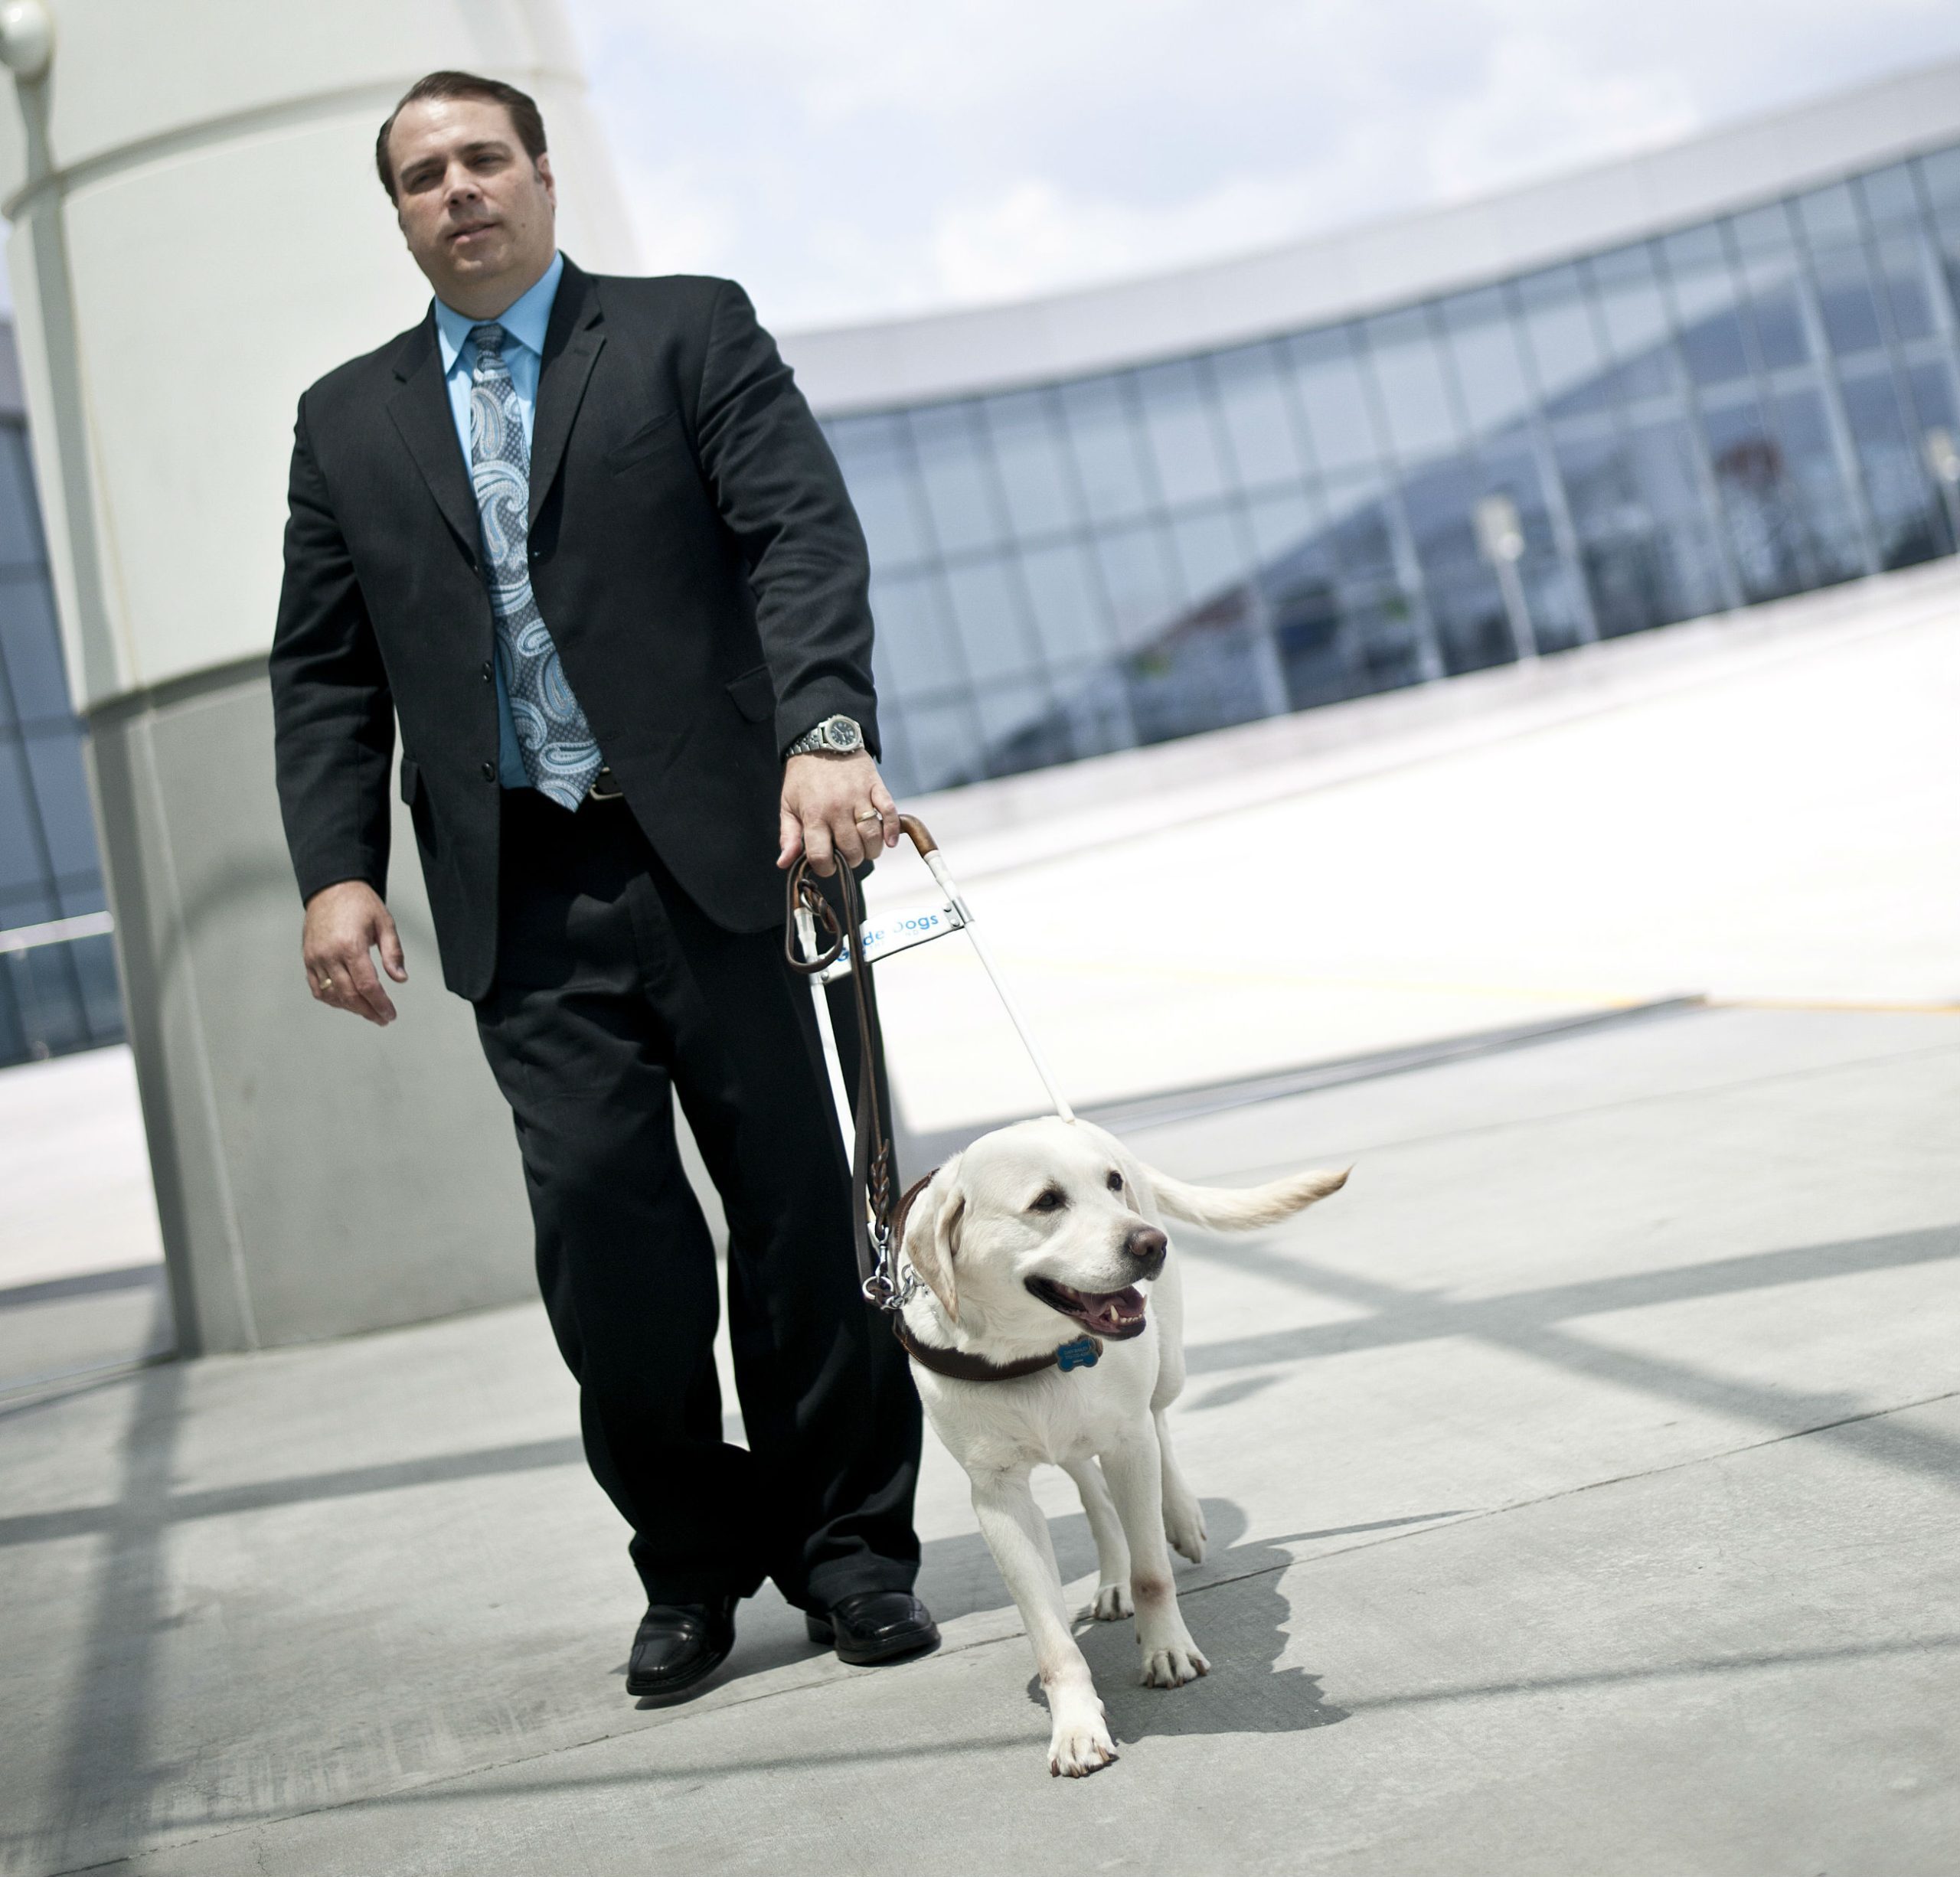 Man in suit being led by a guide dog